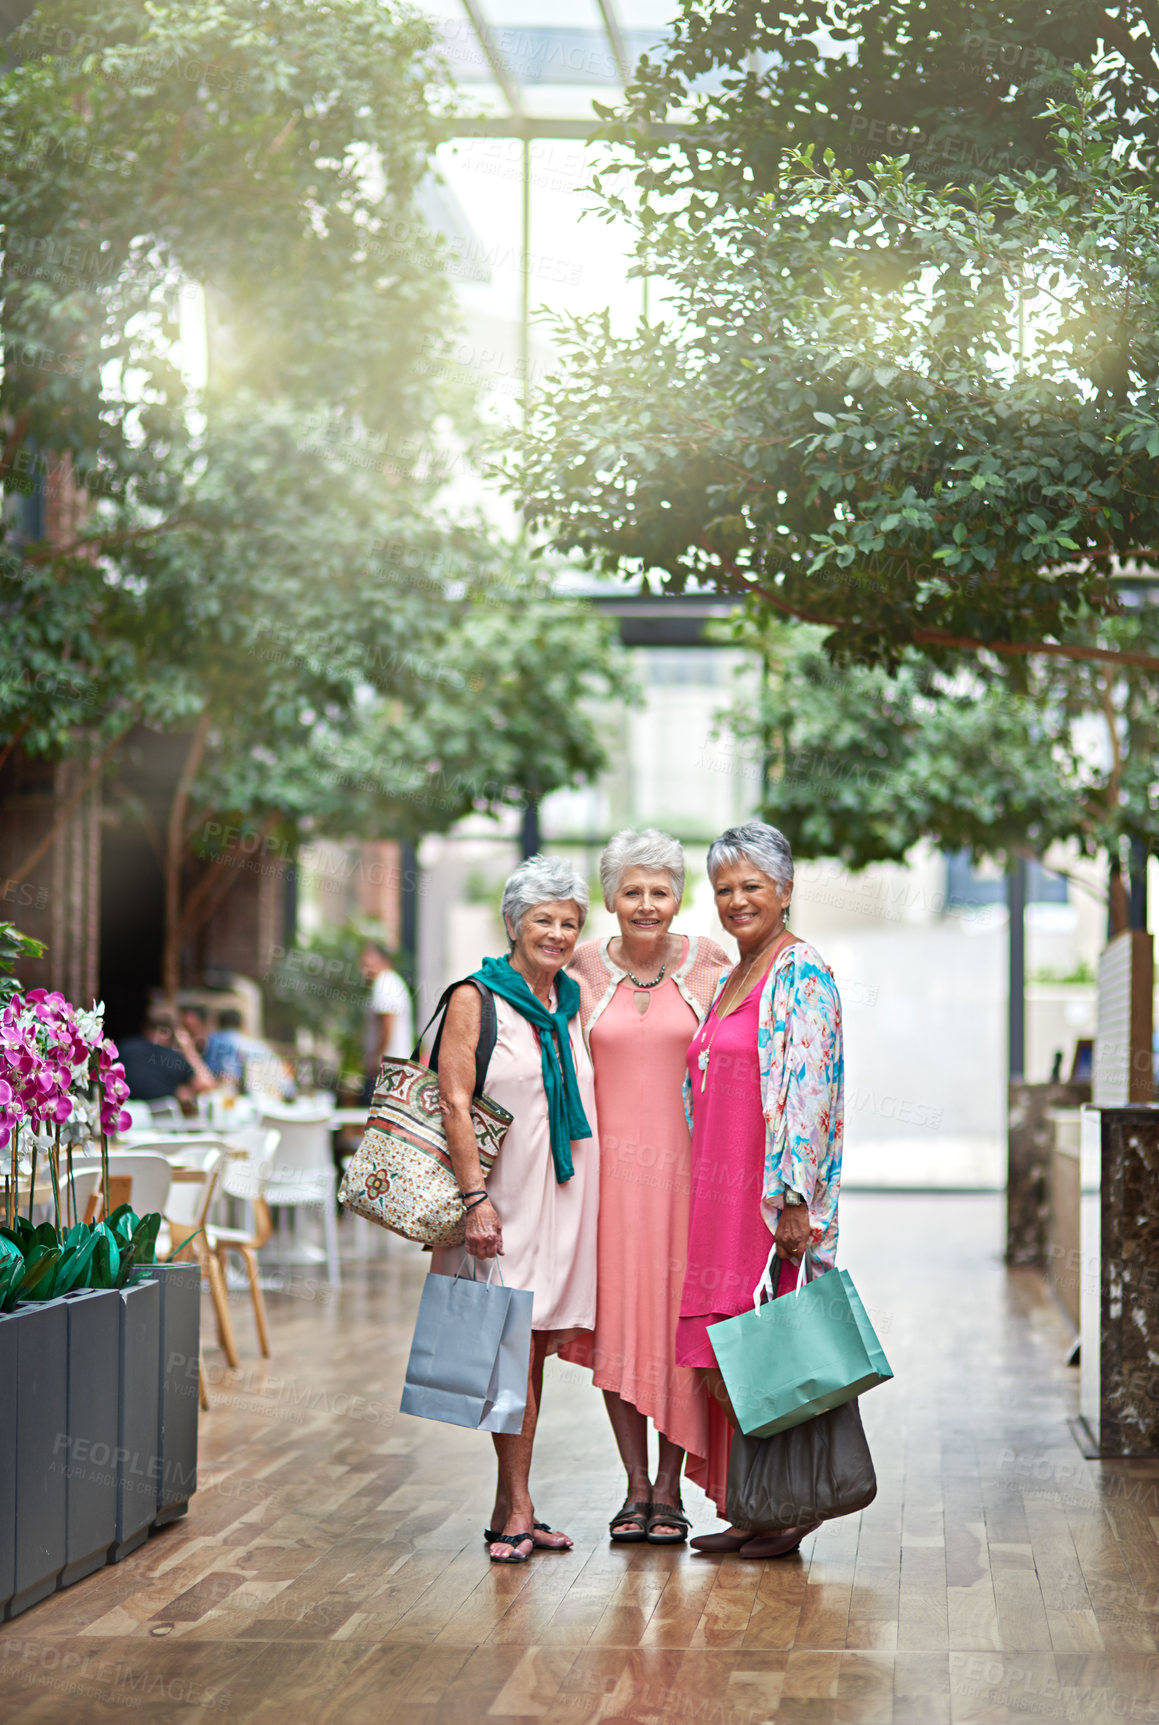 Buy stock photo Full length portrait of a three senior women out on a shopping spree